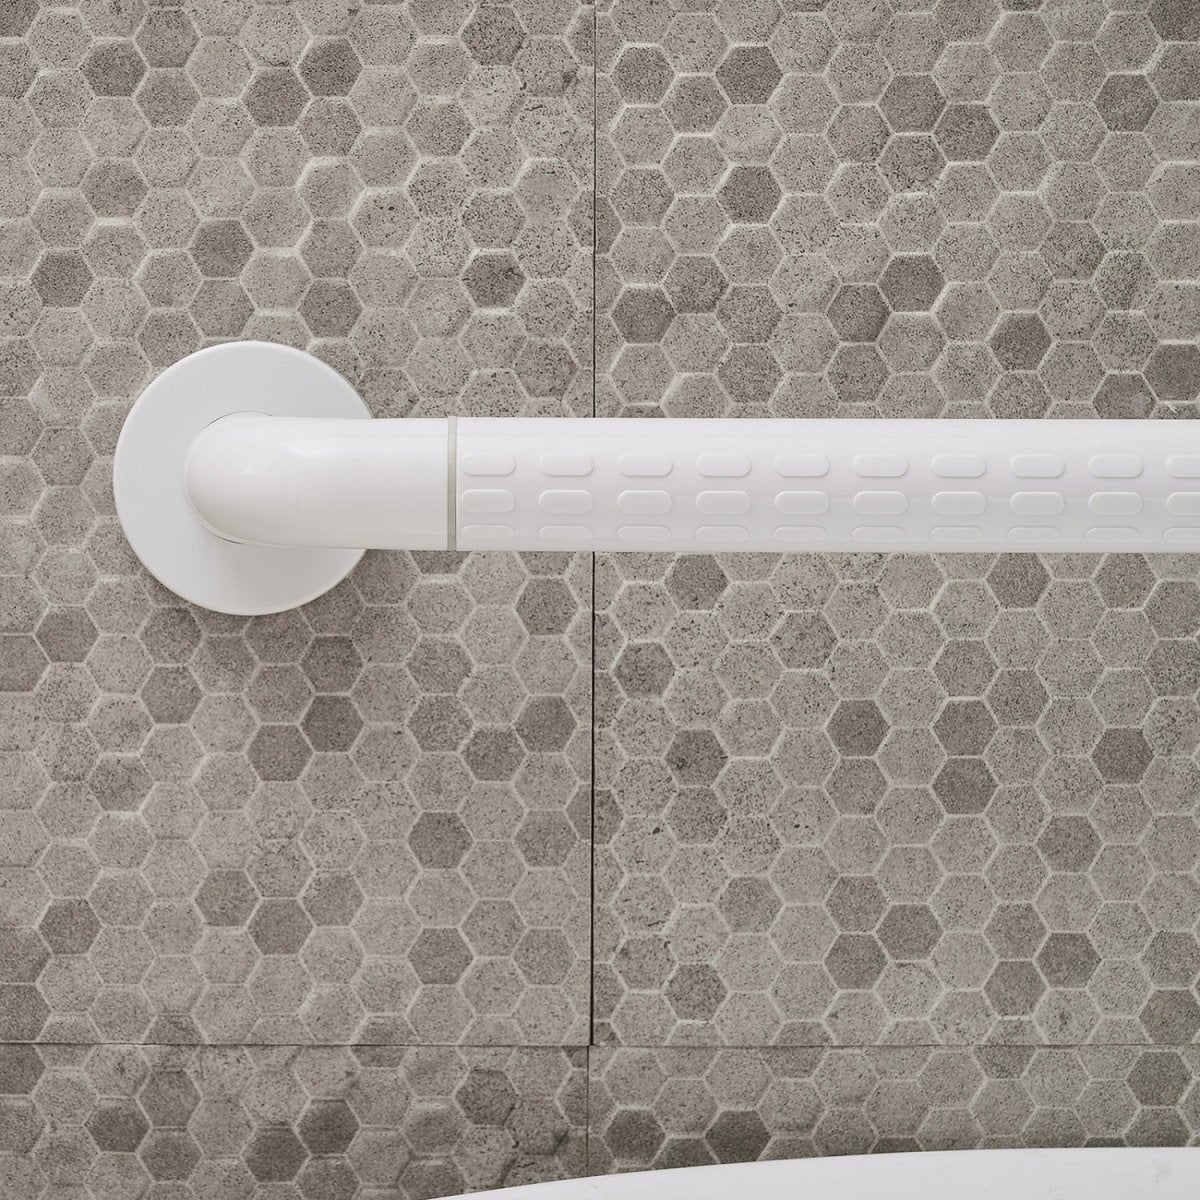 Concealed Screw Grab Bar with Secure Mount in White 17.91" - buyfaucet.com